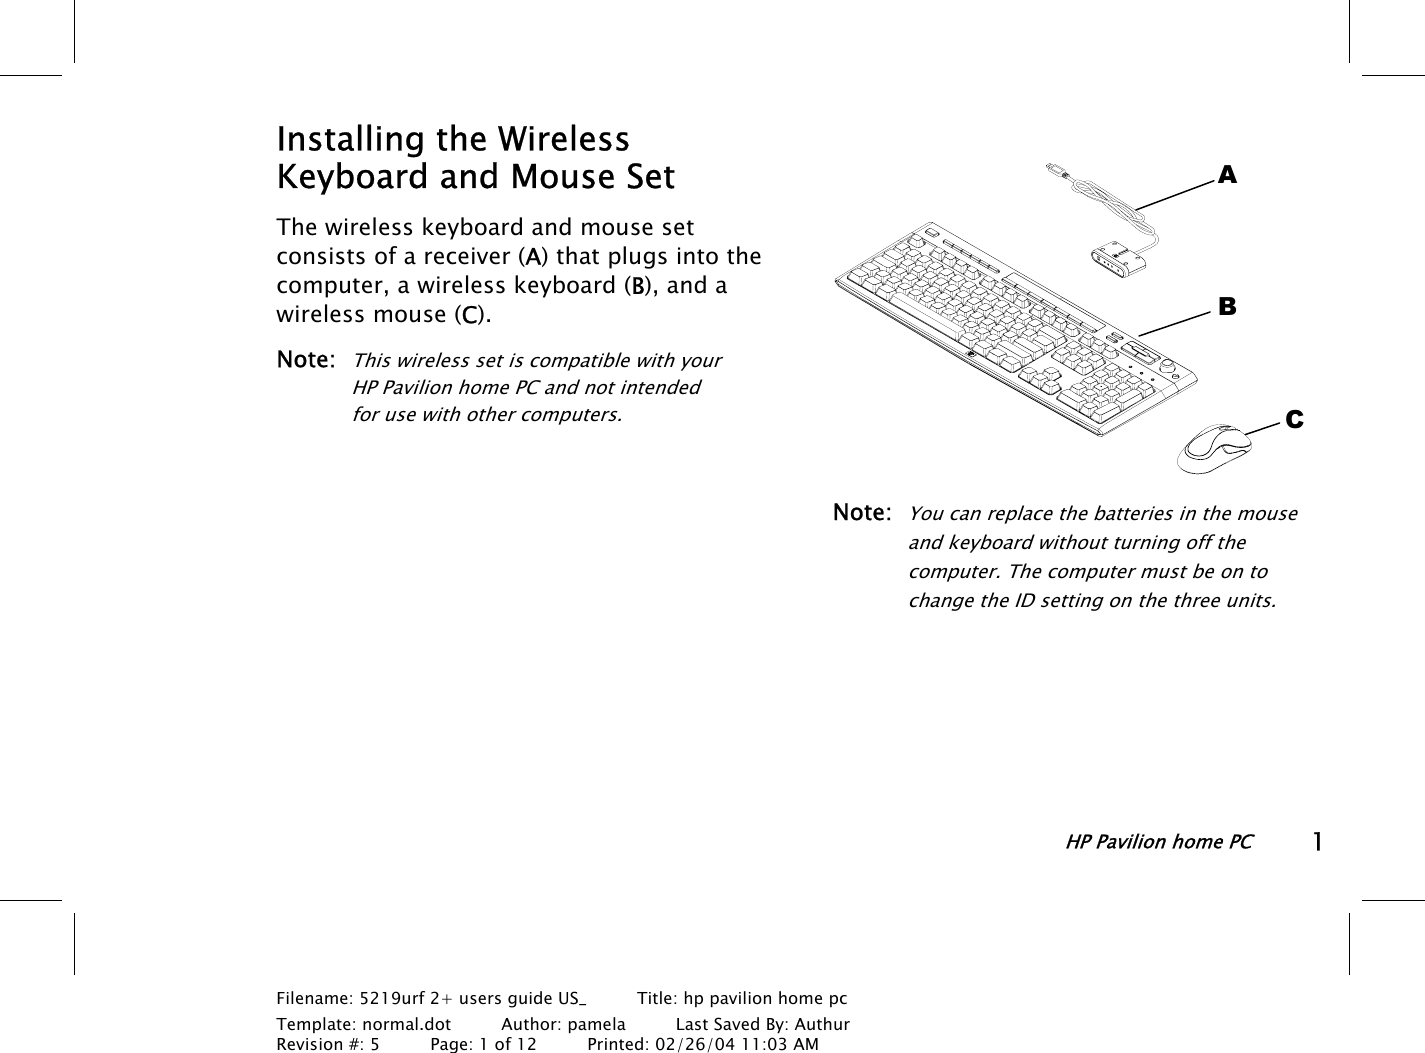 HP Pavilion home PC1Filename: 5219urf 2+ users guide US_       Title: hp pavilion home pcTemplate: normal.dot      Author: pamela      Last Saved By: AuthurRevision #: 5      Page: 1 of 12      Printed: 02/26/04 11:03 AMInstalling the WirelessKeyboard and Mouse SetThe wireless keyboard and mouse setconsists ofa receiver (A) that plugs into thecomputer, a wireless keyboard (B), and awireless mouse (C).Note:This wireless set is compatible with yourHPPavilion home PC and not intendedforusewithother computers.Note:You can replace the batteries in the mouseandkeyboard without turning off thecomputer. The computer must be on tochange the ID setting on the three units.ABC